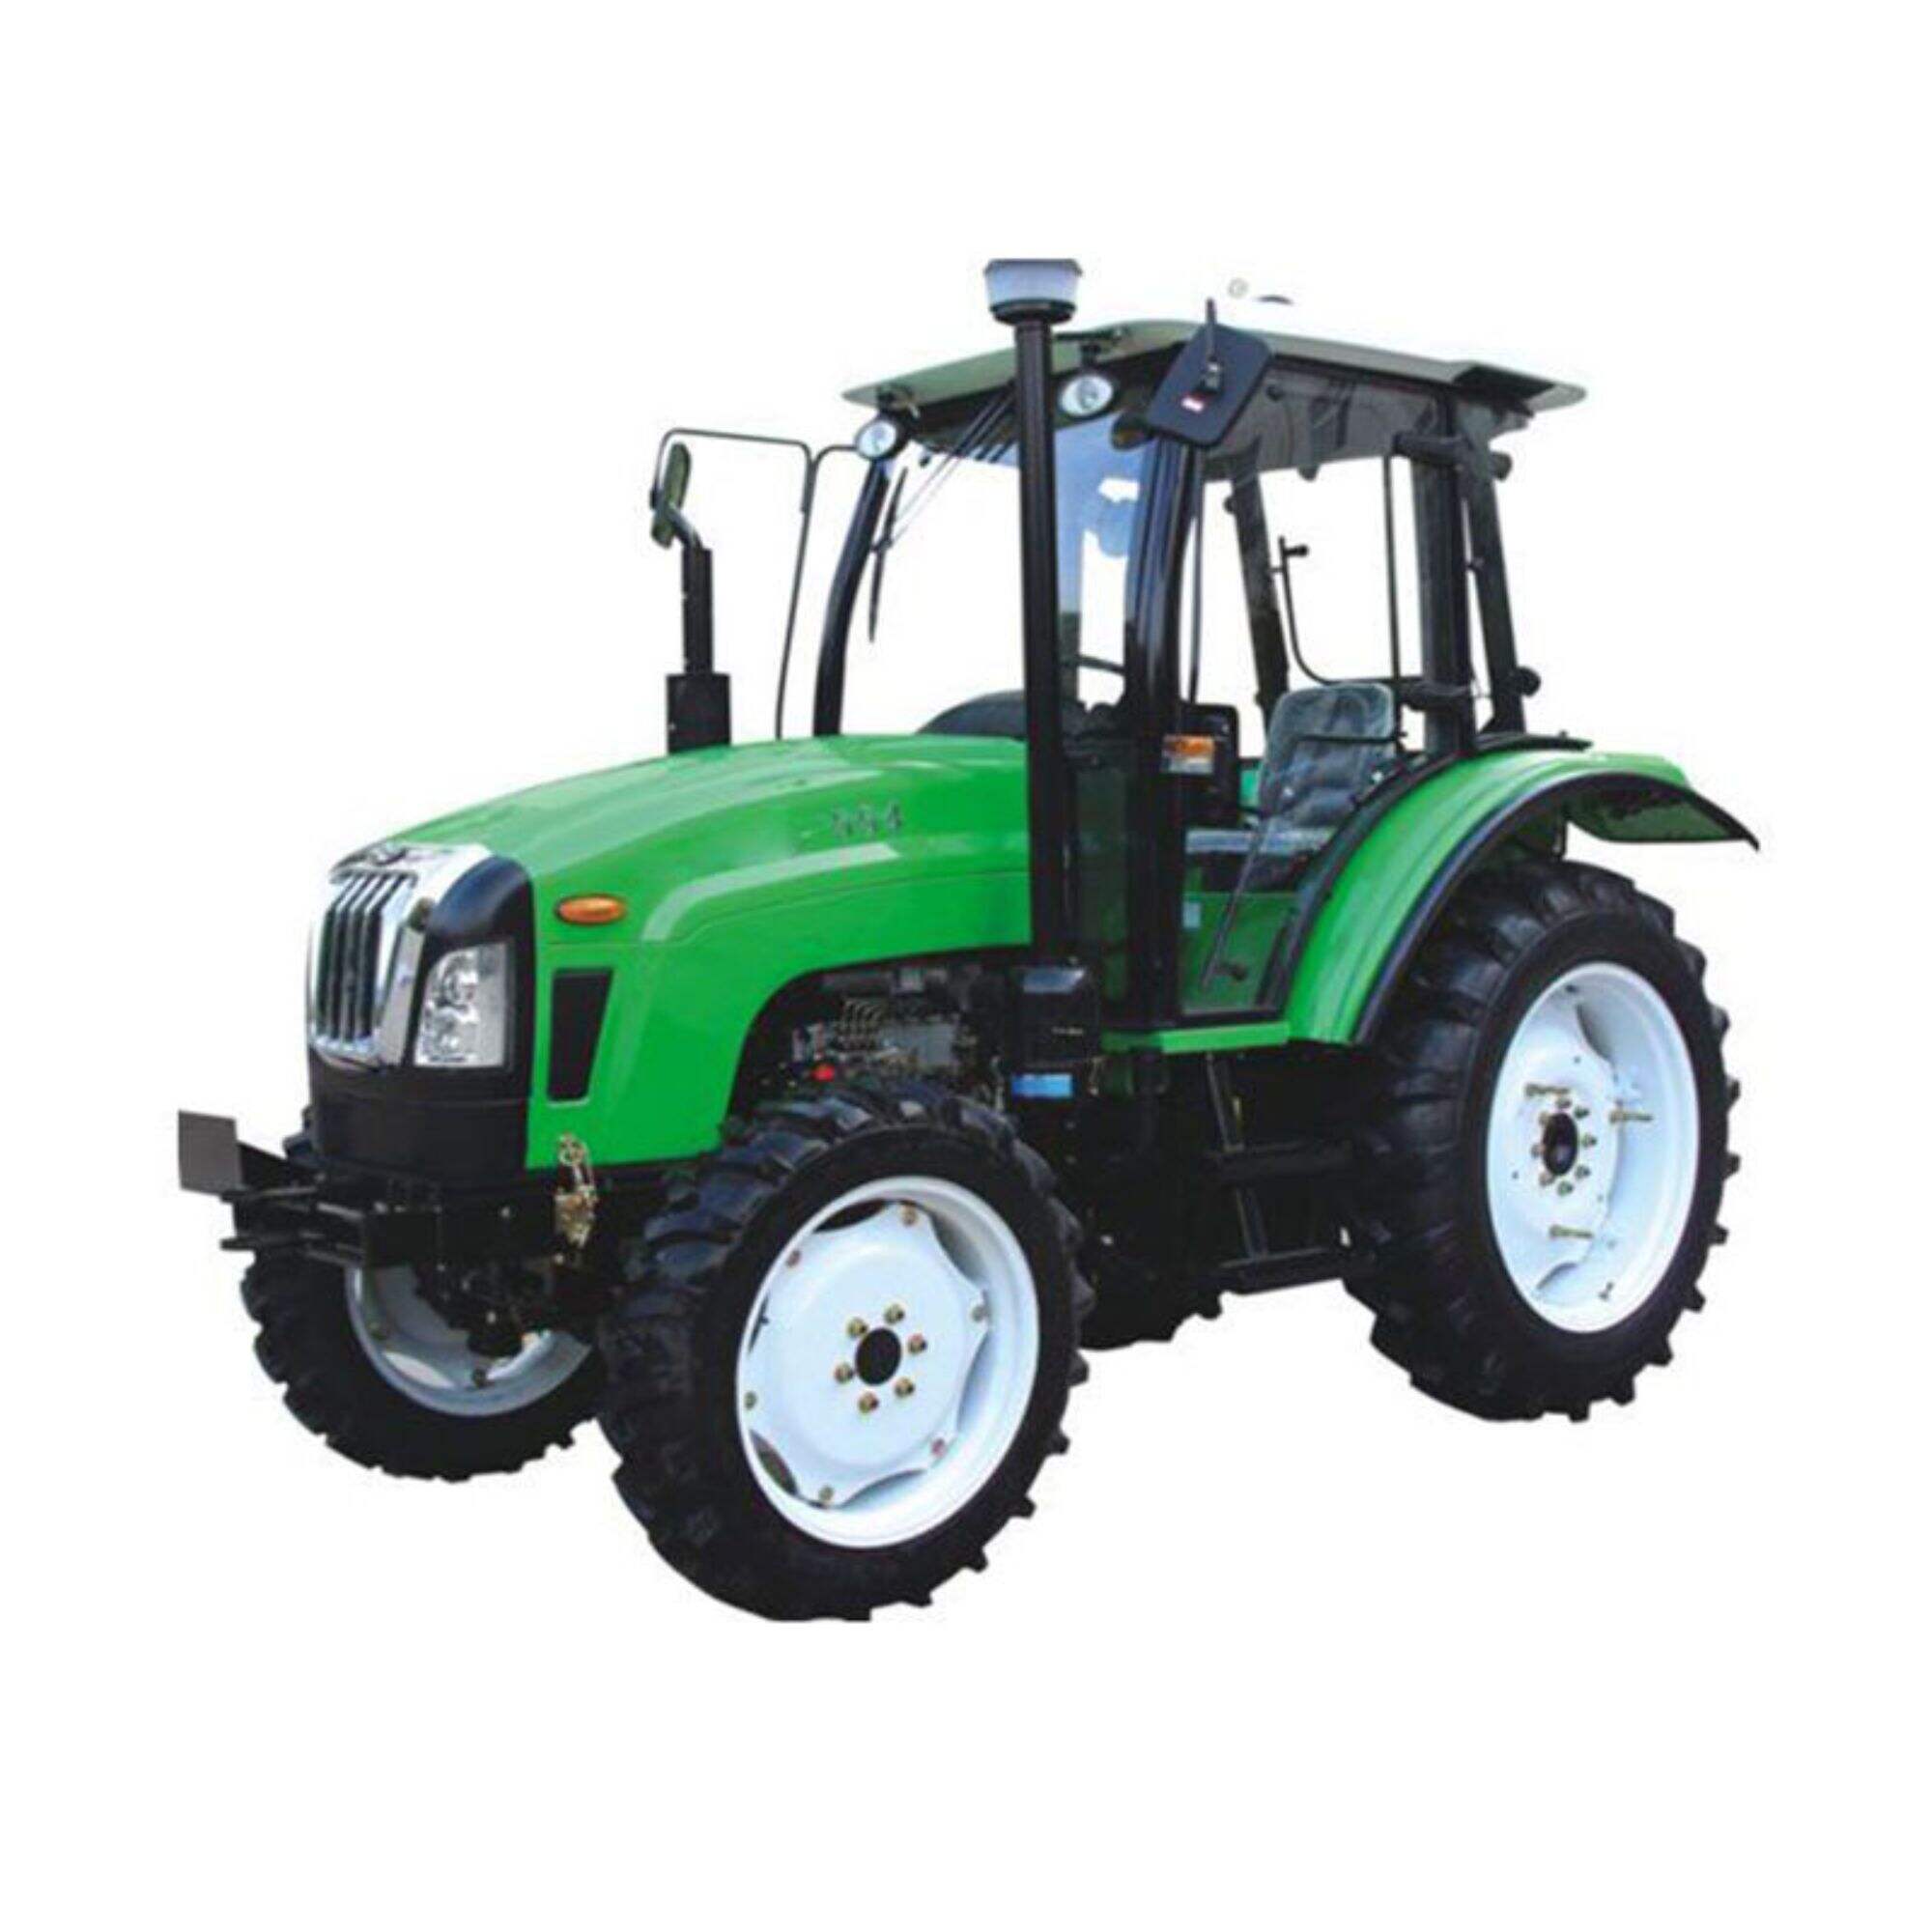 Self-Propelled Tractores agricolas 4x4 Used Compact Tractors LUTONG 704E for Agriculture